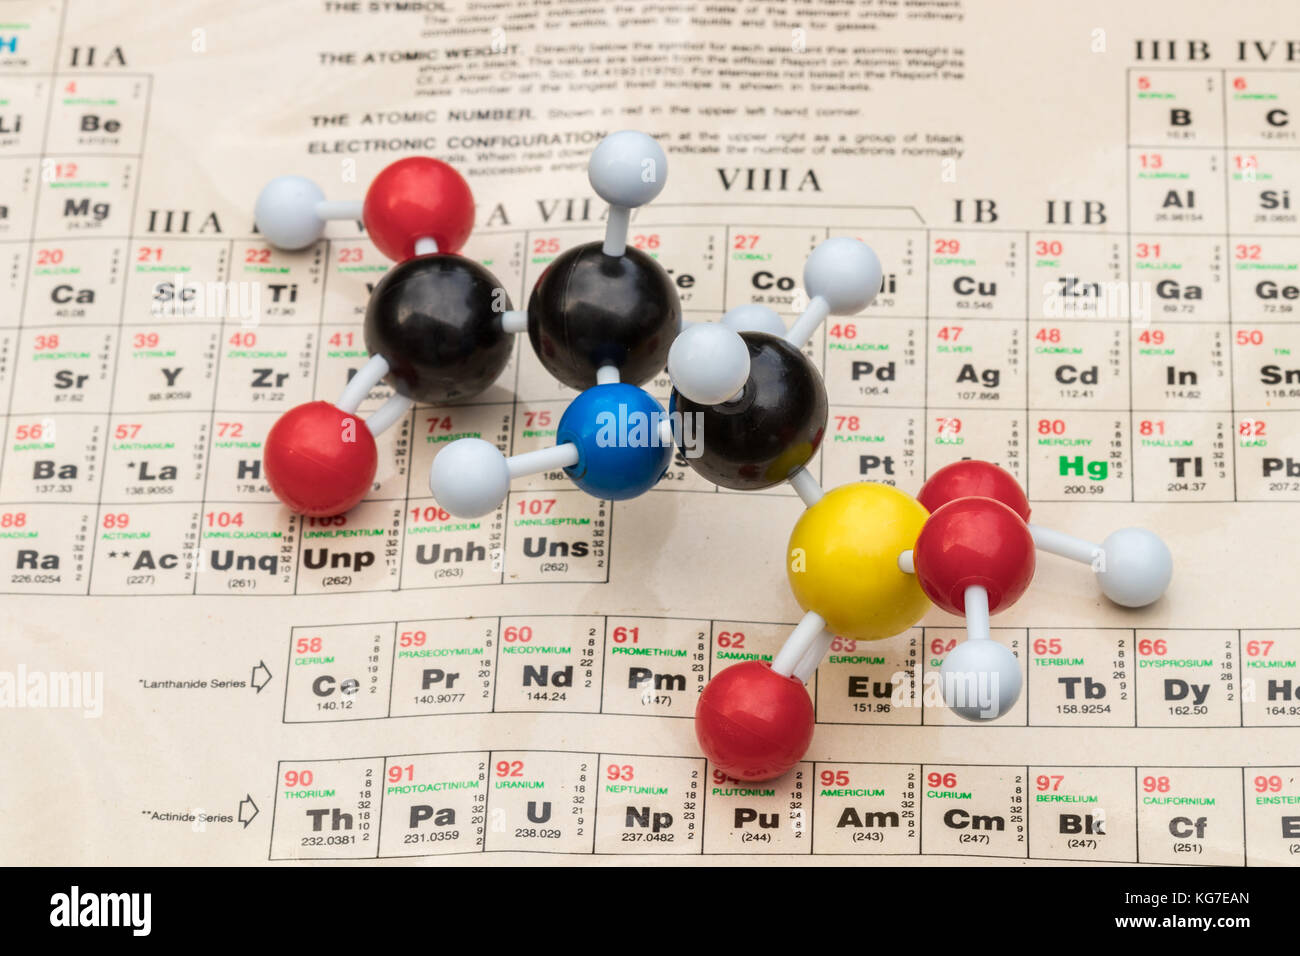 Plastic ball-and-stick model of the systemic herbicide glyphosate (chemical formula: C3H8NO5P) with the periodic table of elements on the background. Stock Photo